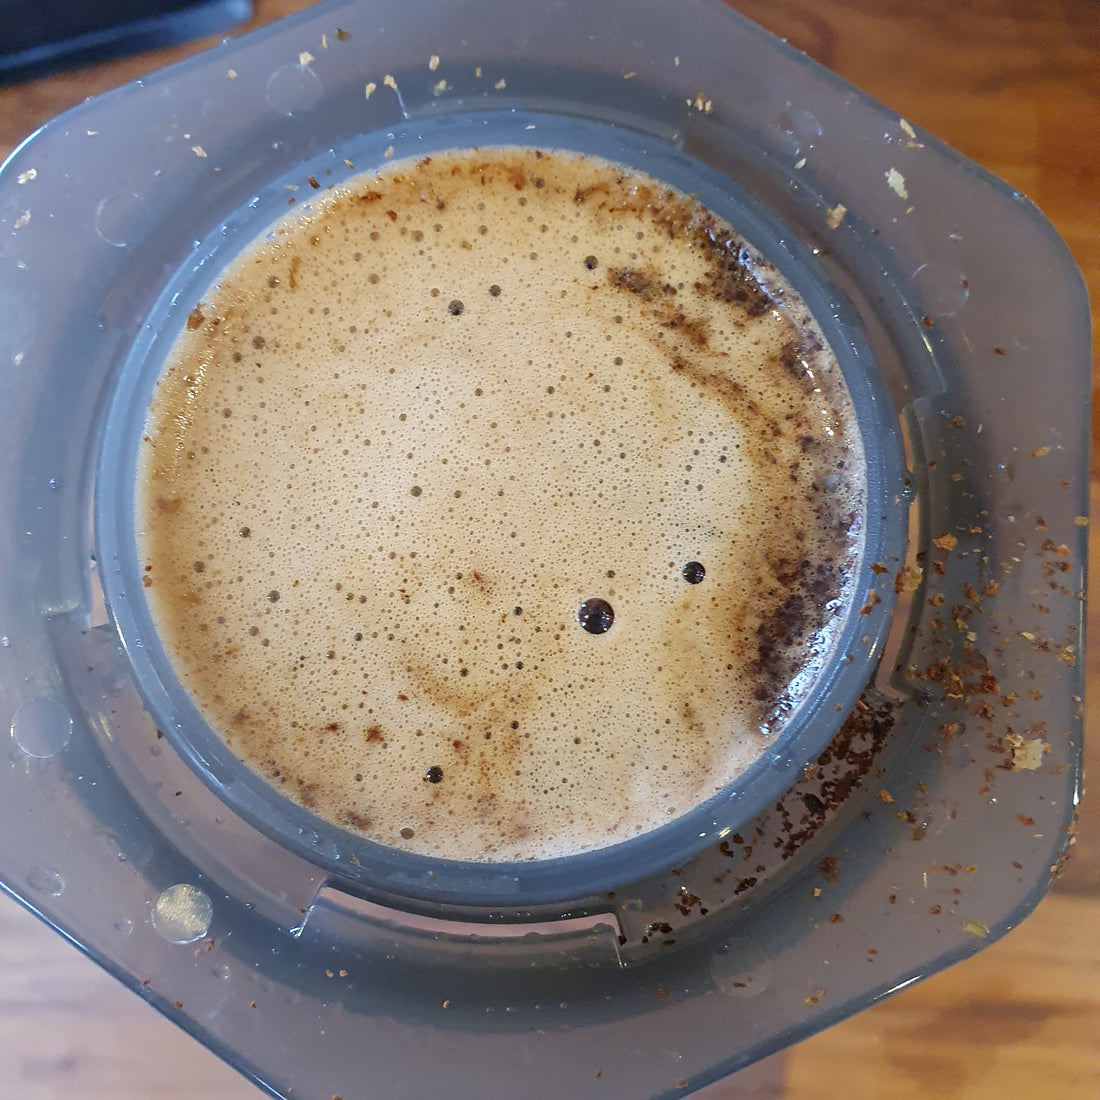 My Experience with the Aeropress